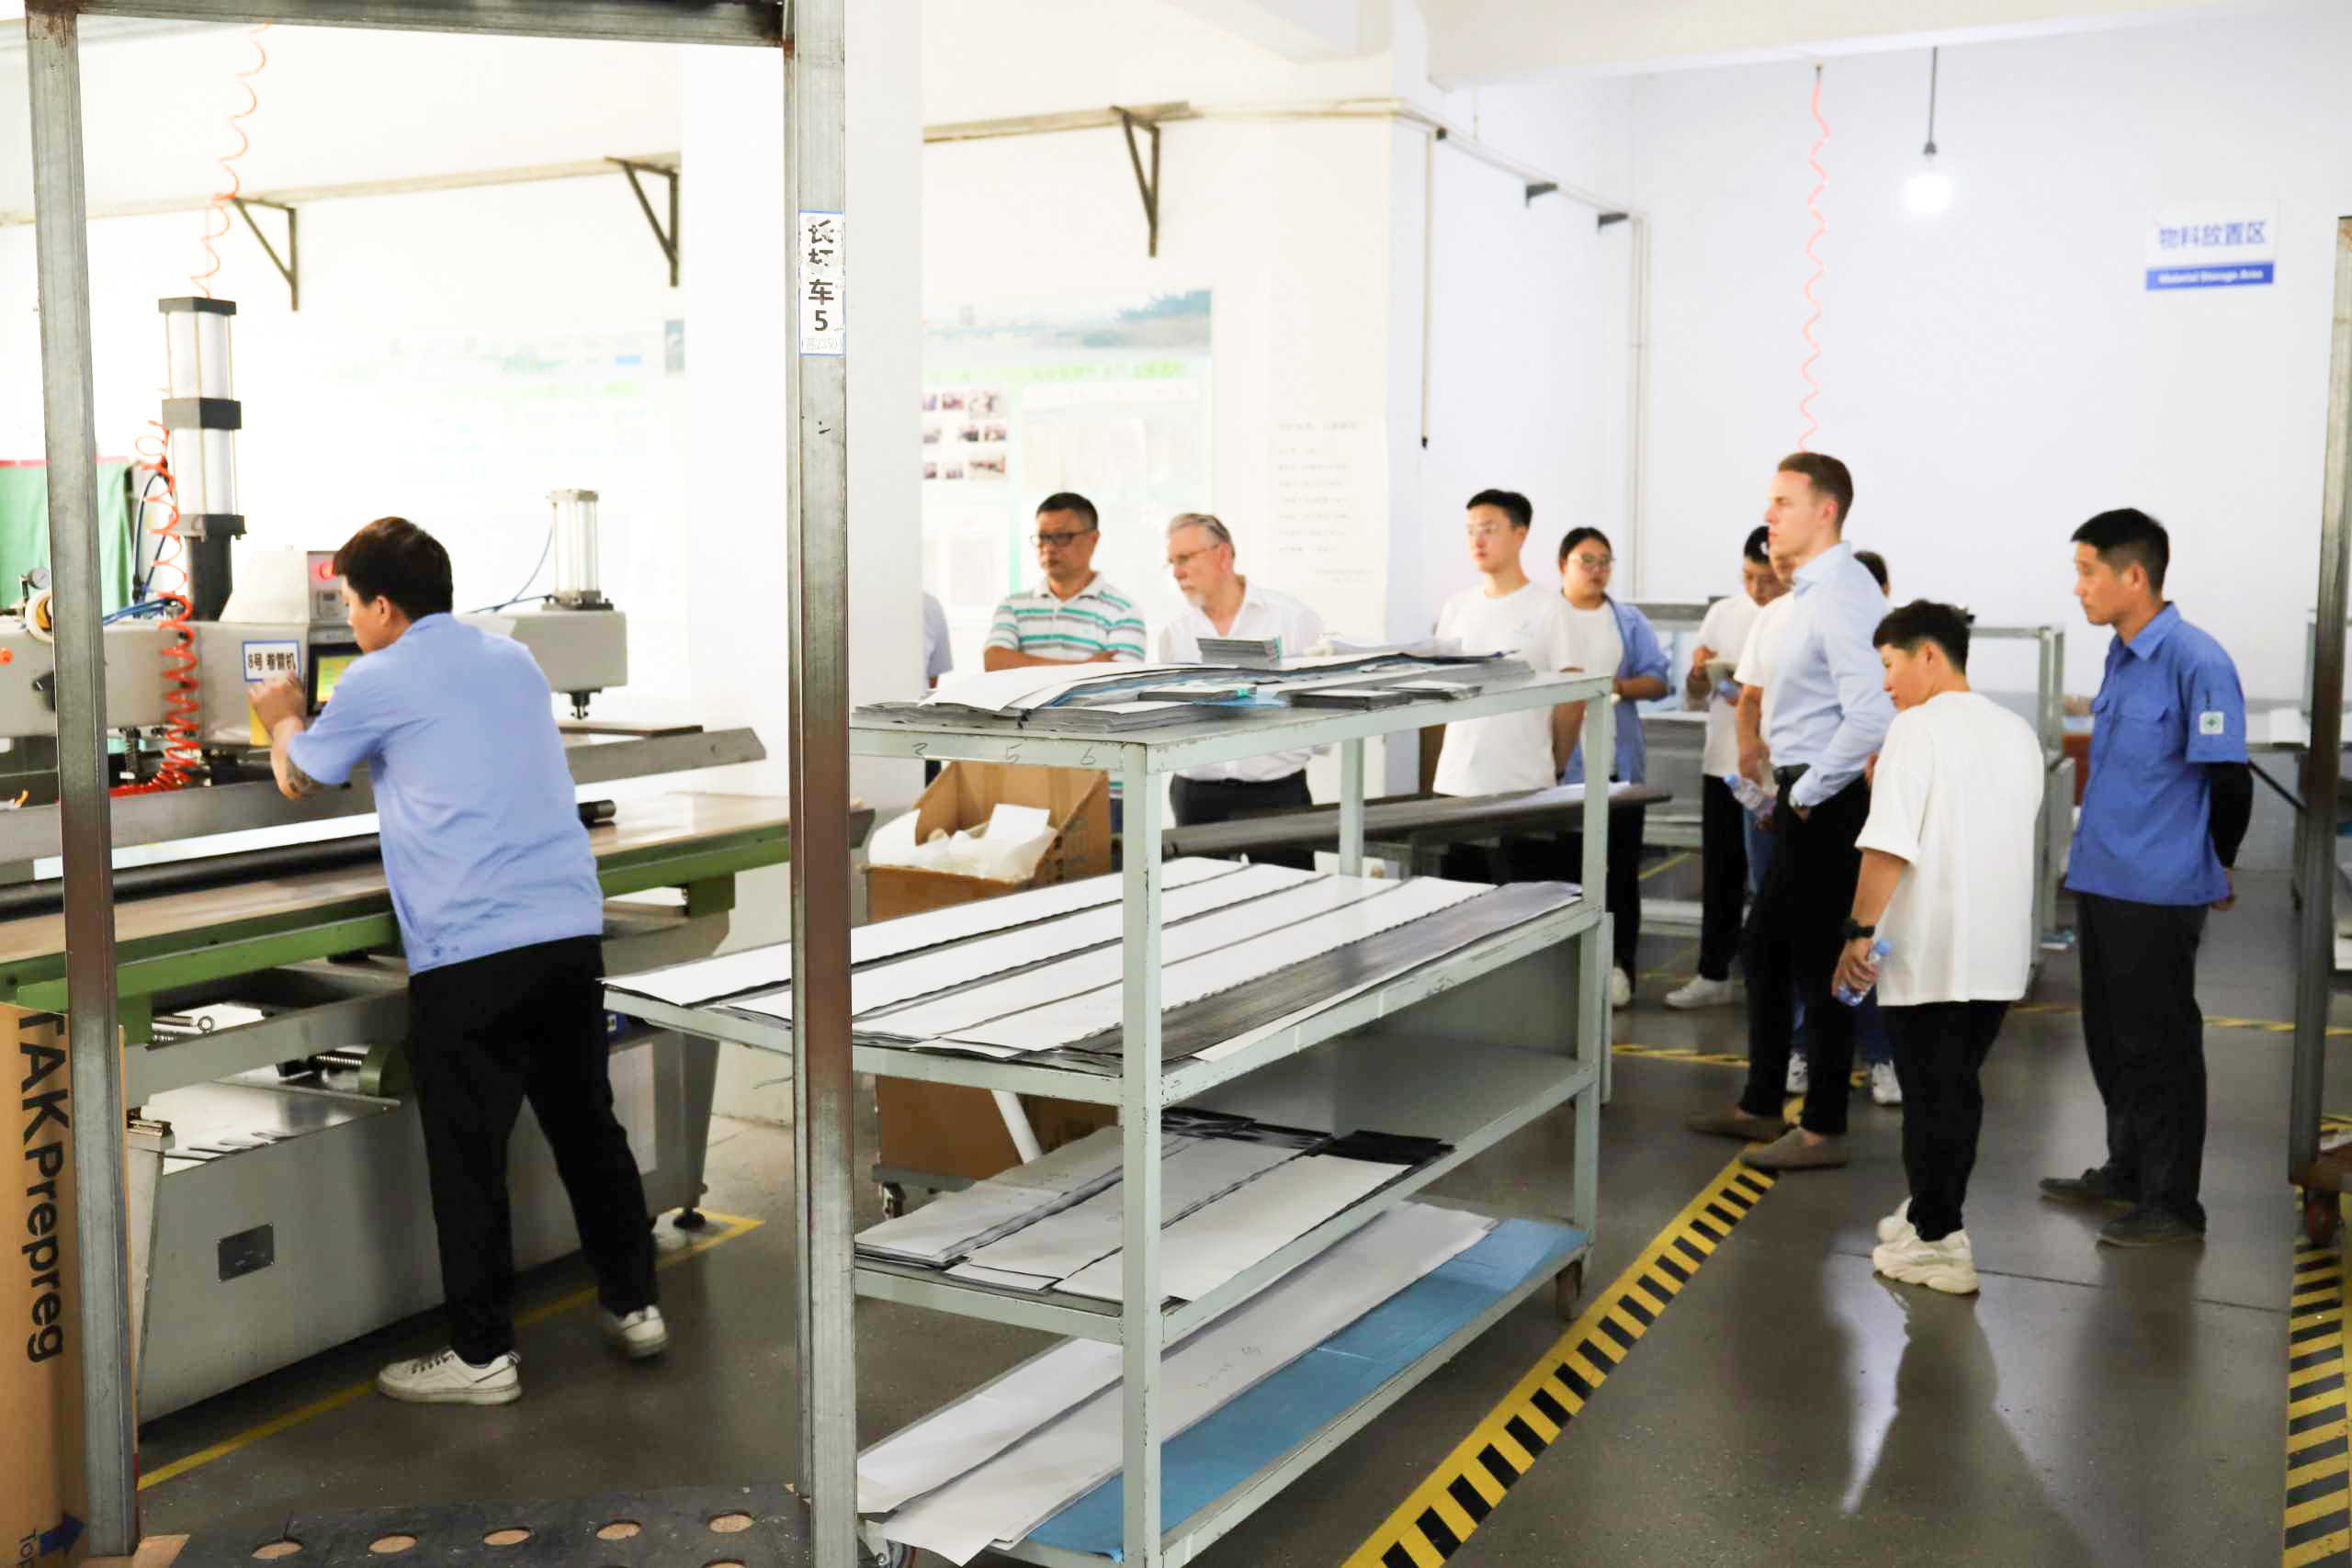 Long-Time German Partner Visits our China Factory to Strengthen Business Ties